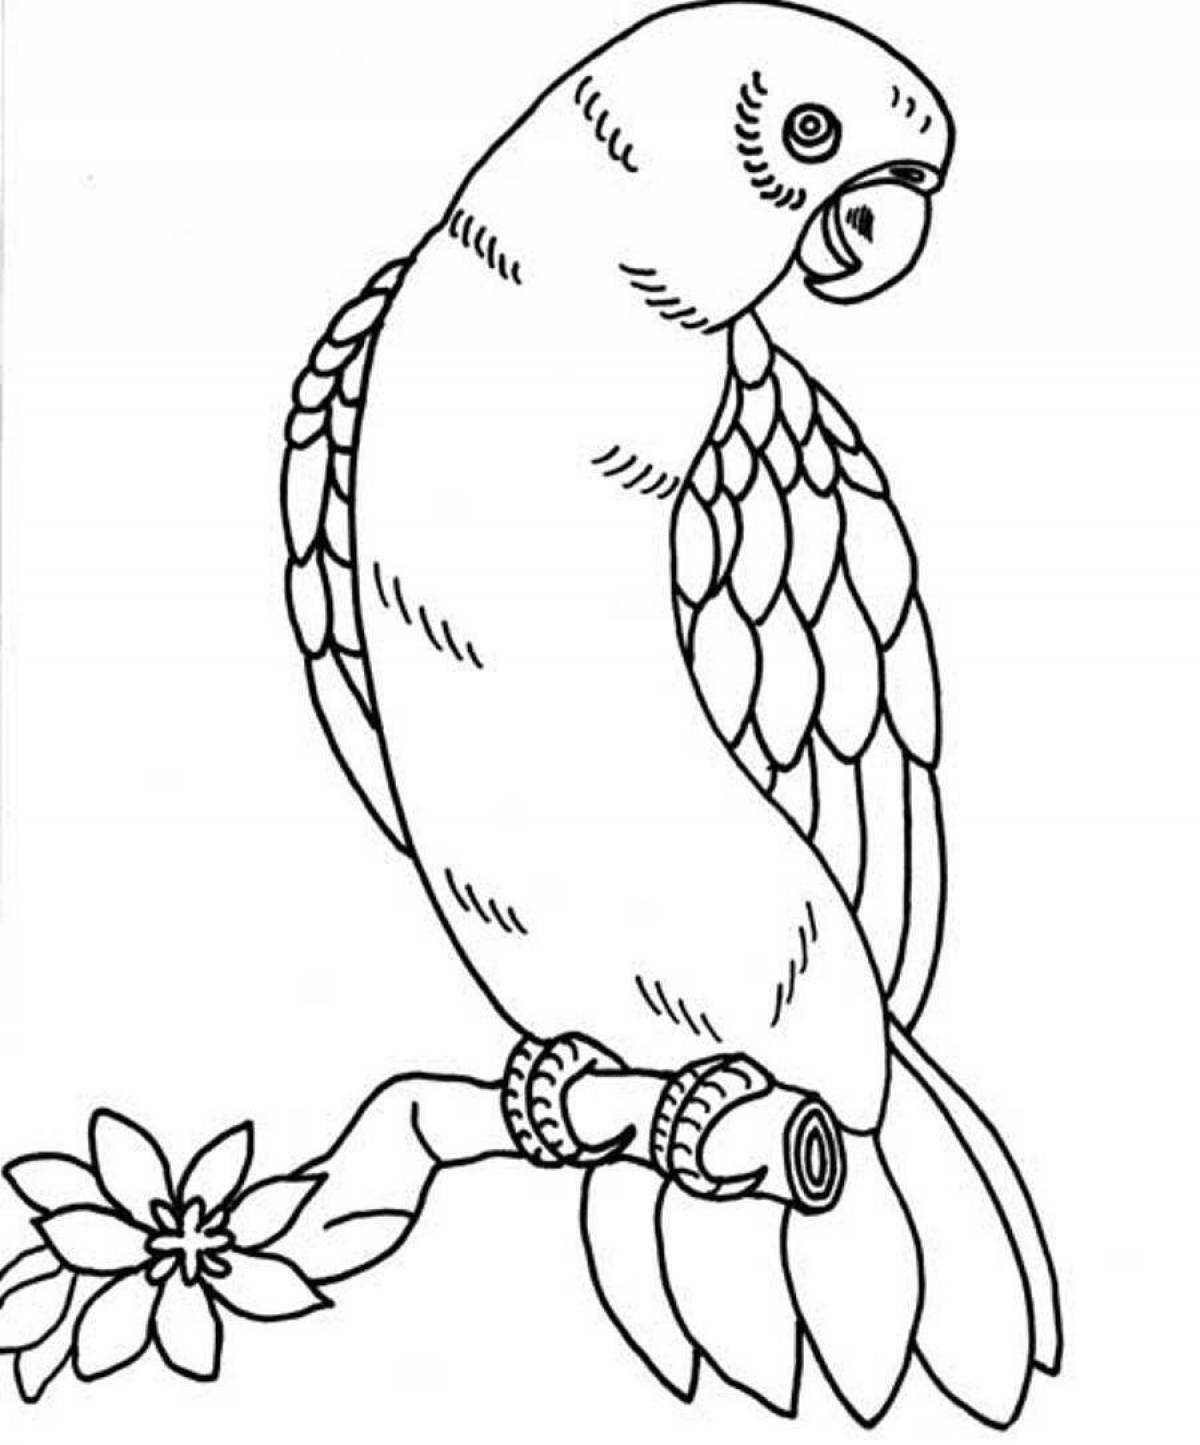 Fabulous coloring pages animals and birds